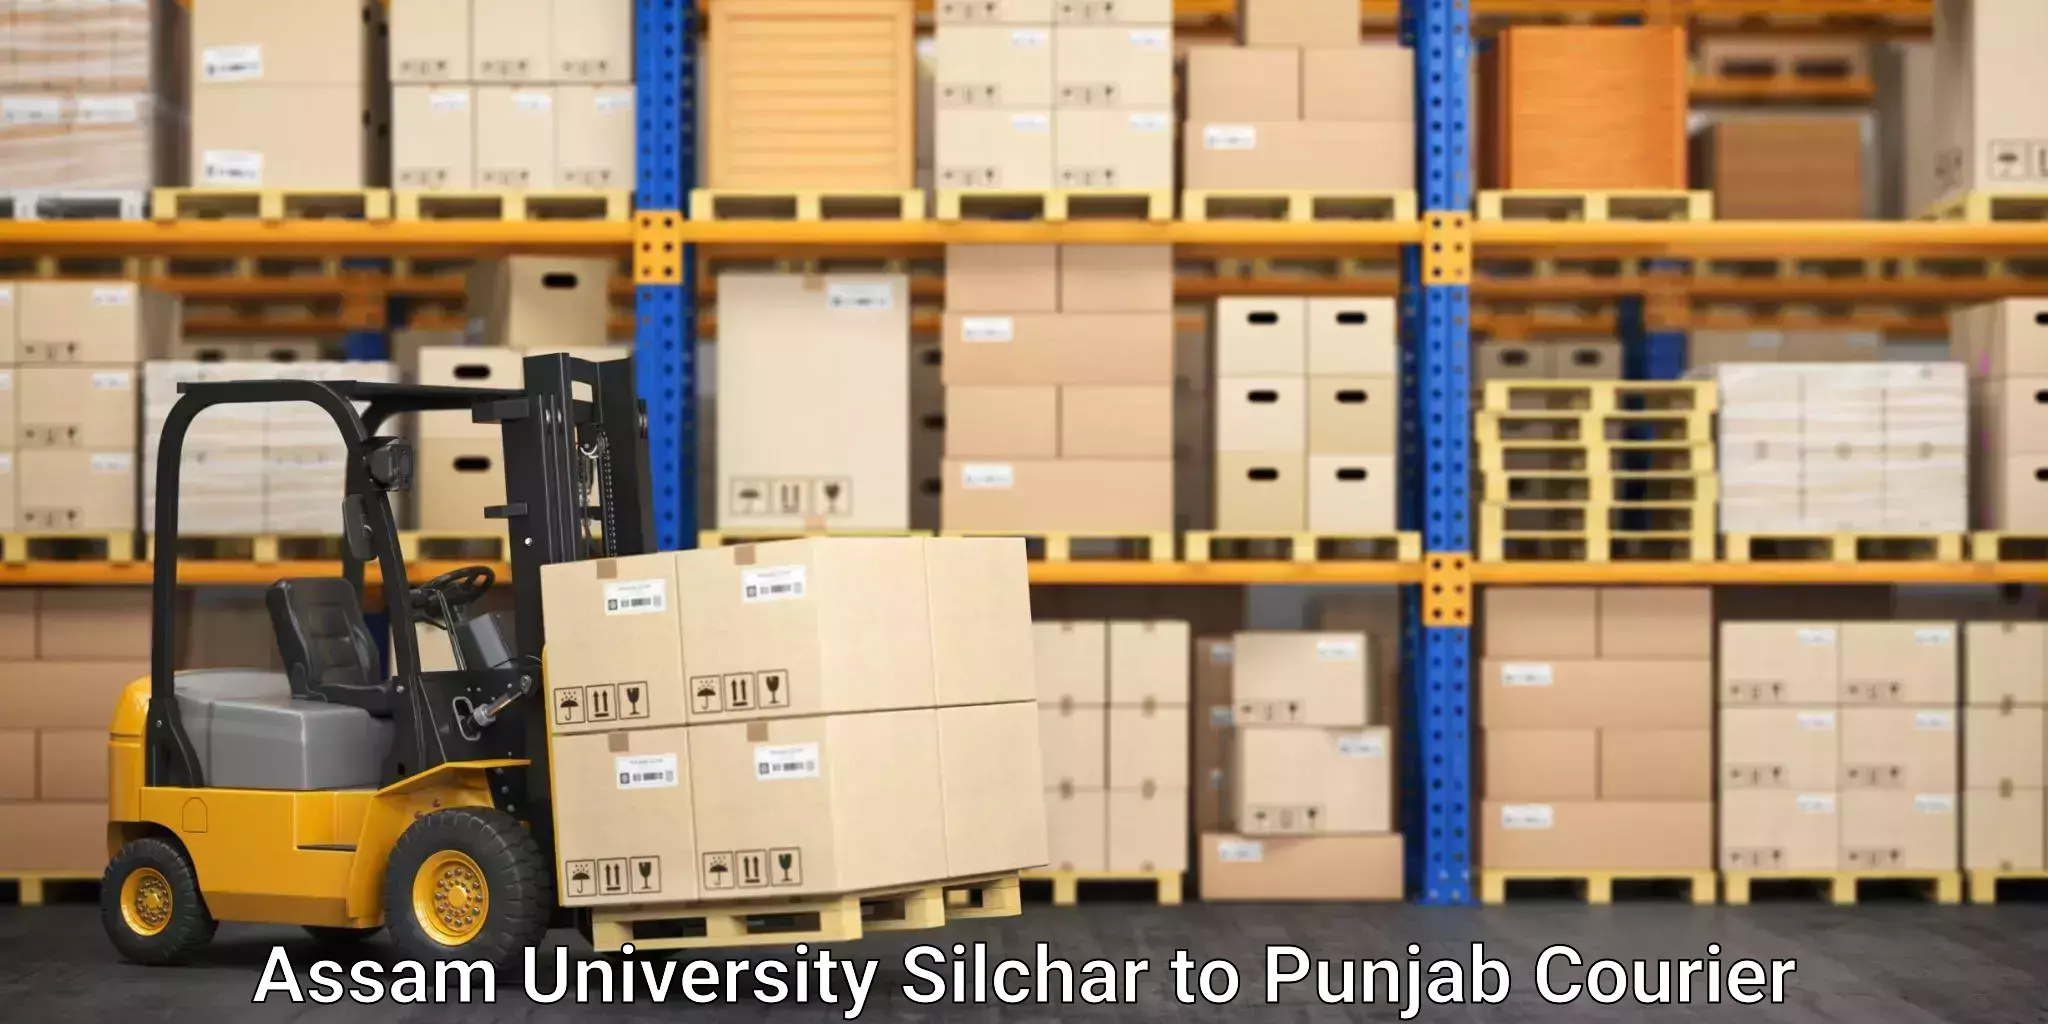 Reliable shipping partners Assam University Silchar to Dhilwan